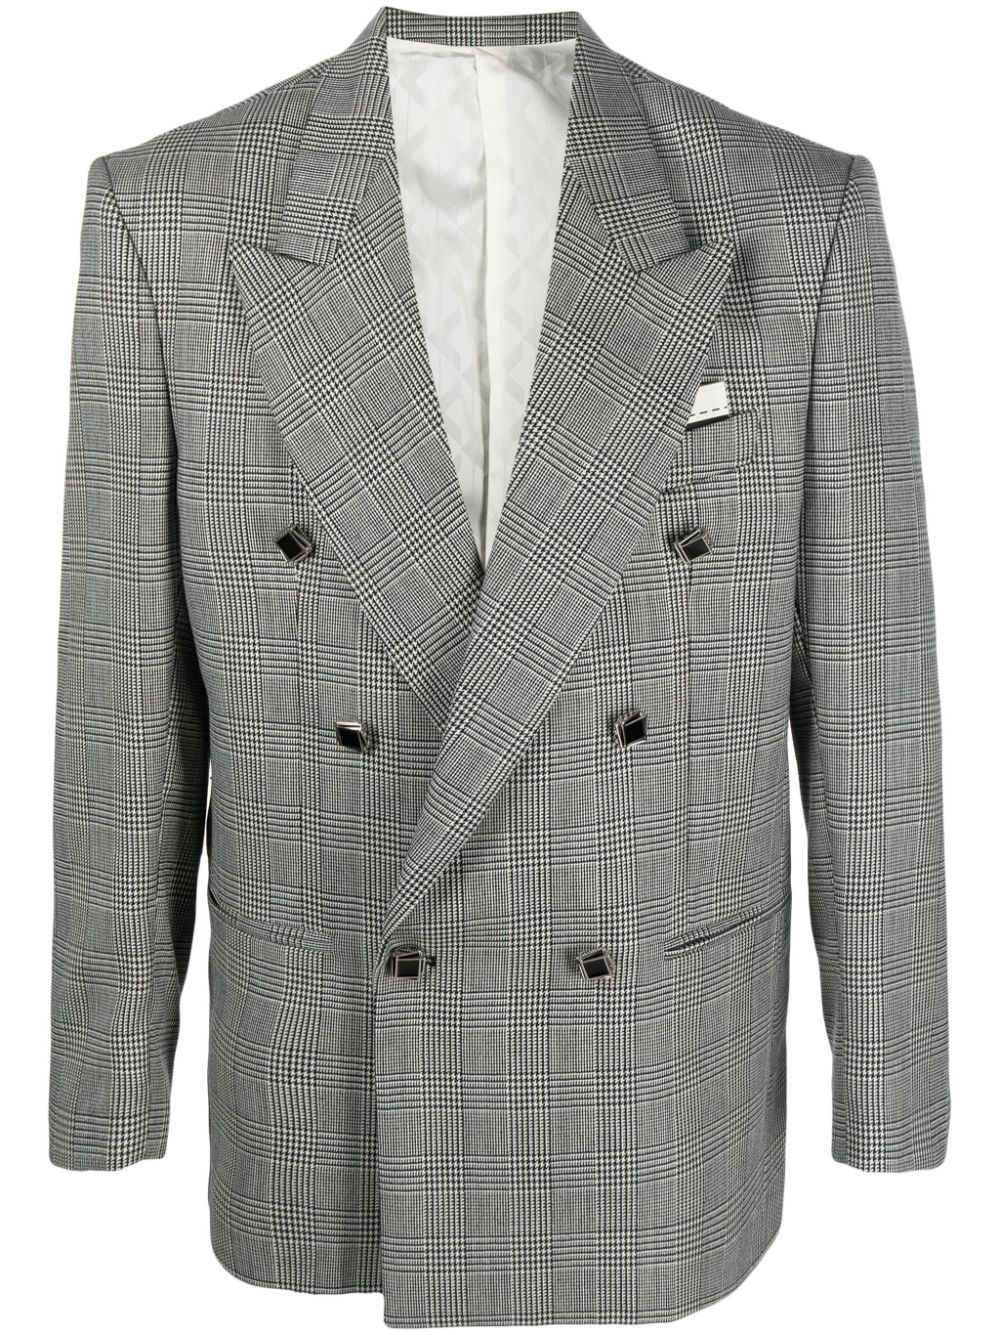 CANAKU double-breasted Checked Wool Blazer - Farfetch